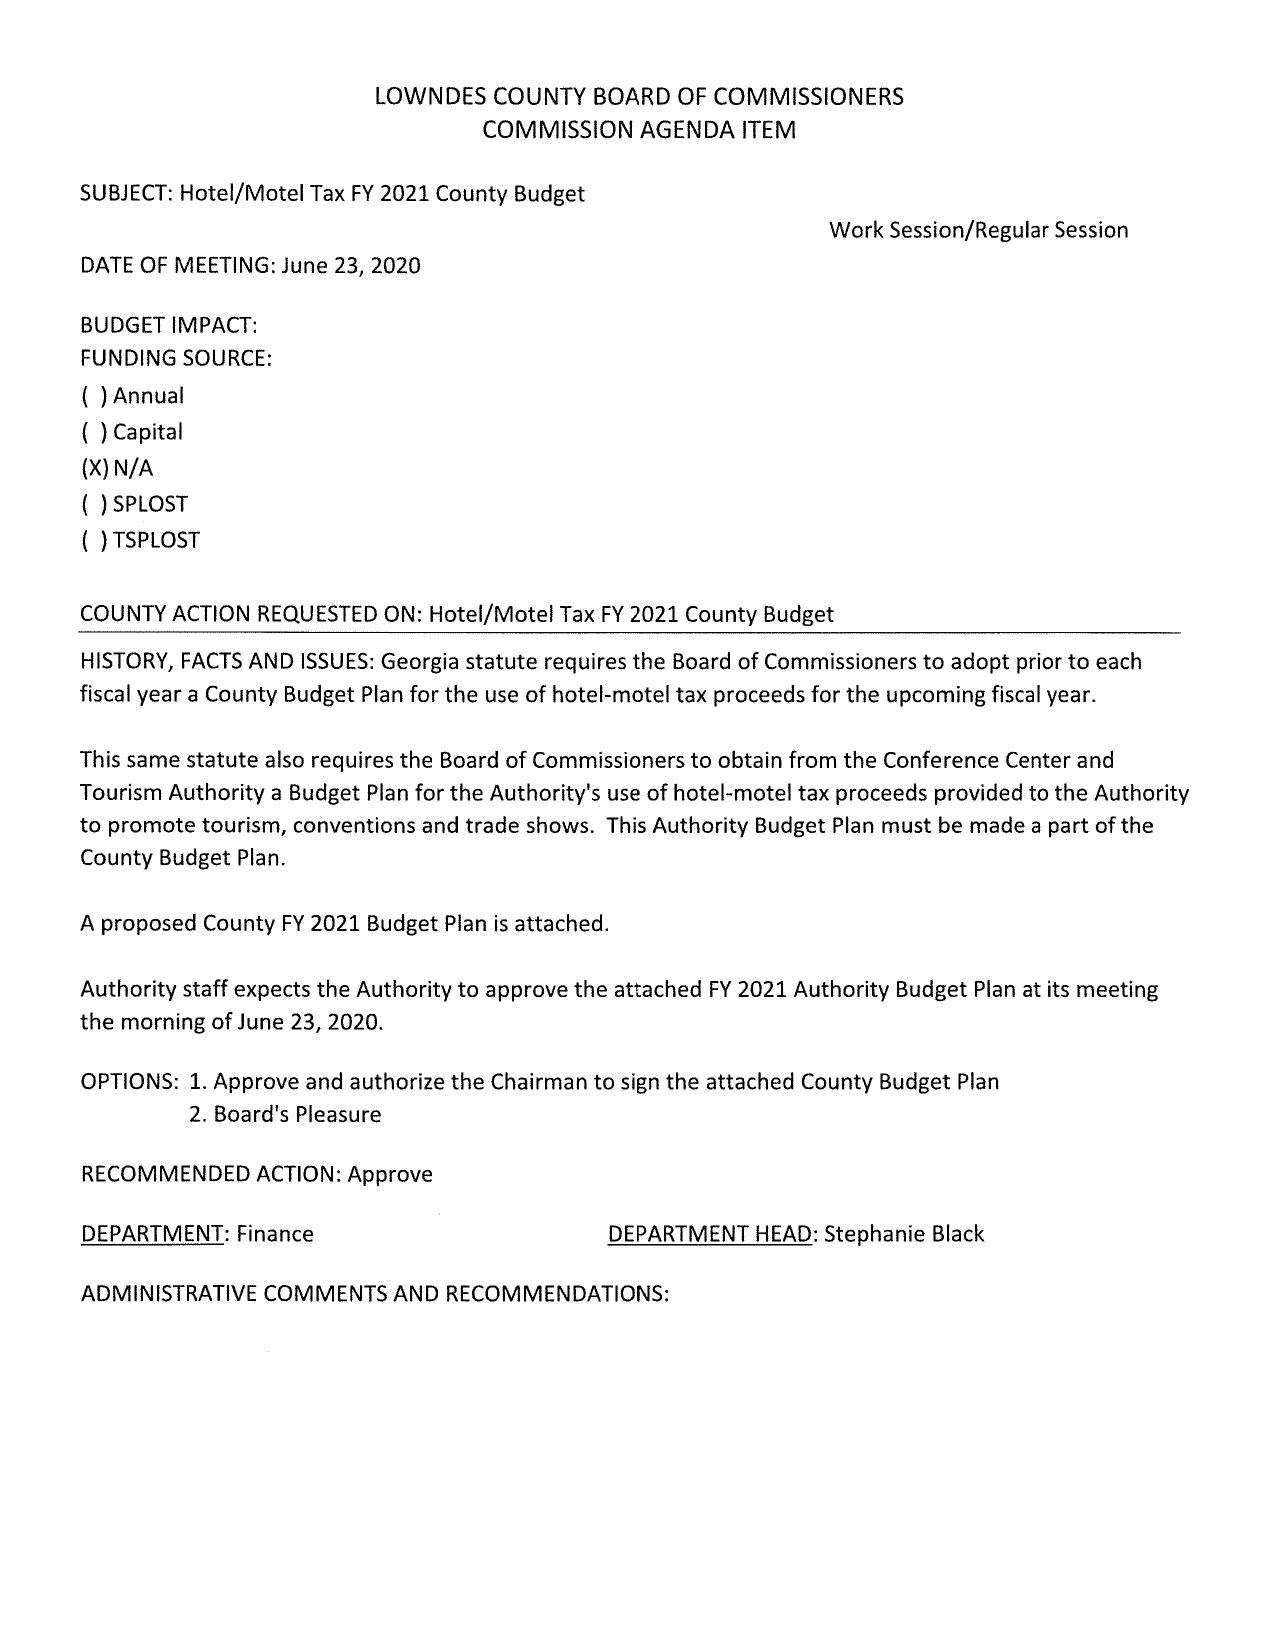 OPTIONS: 1. Approve and authorize the Chairman to sign the attached County Budget Plan